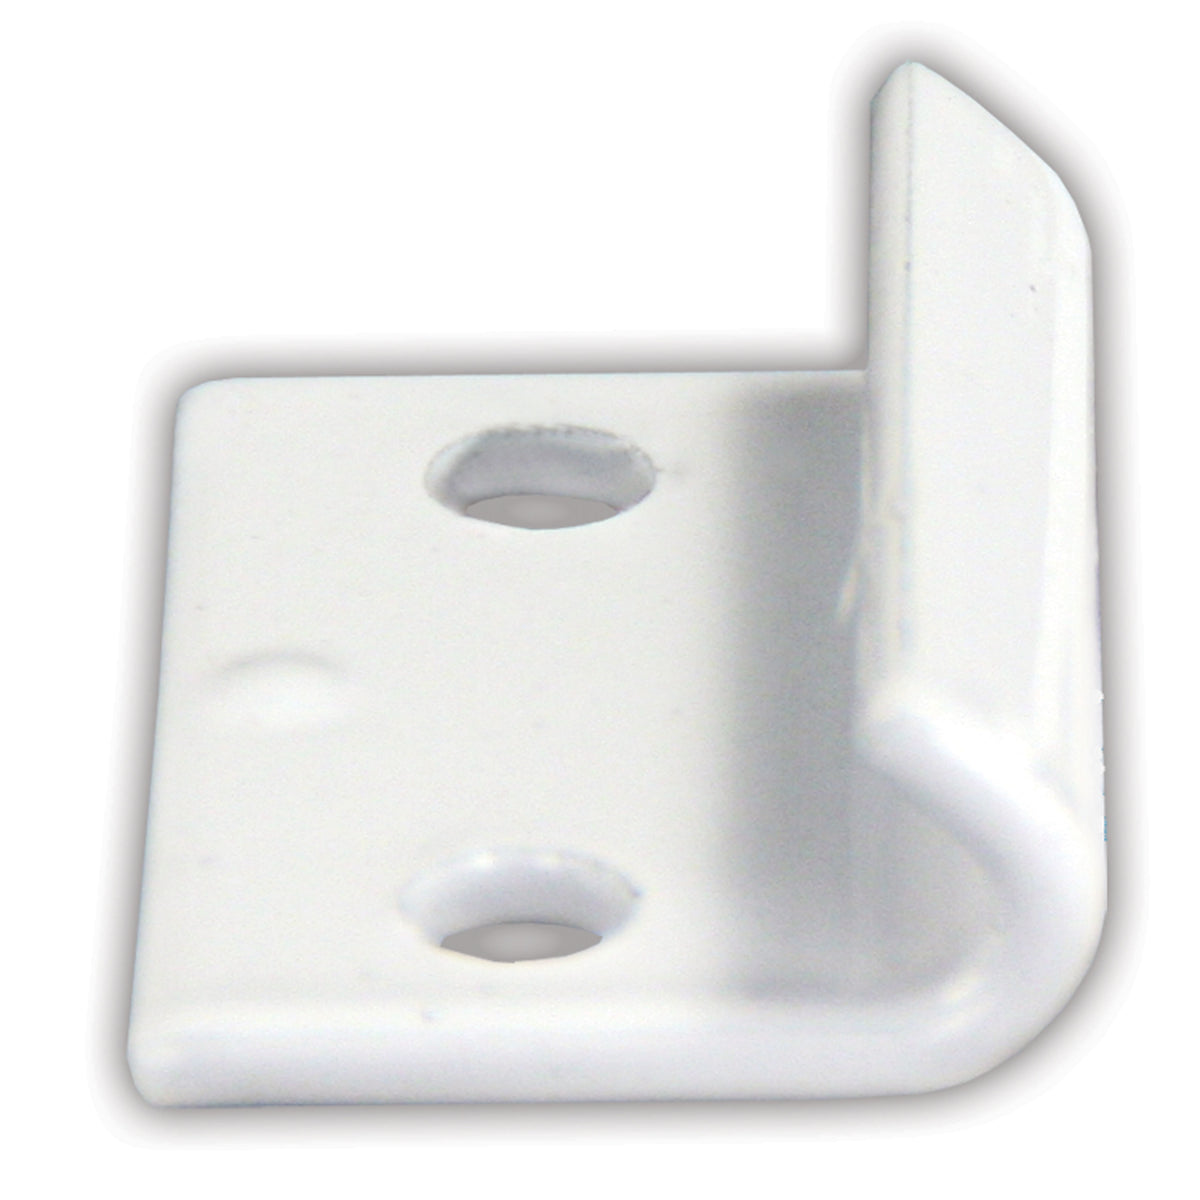 JR Products 10855 Fold Down Camper Catch - White